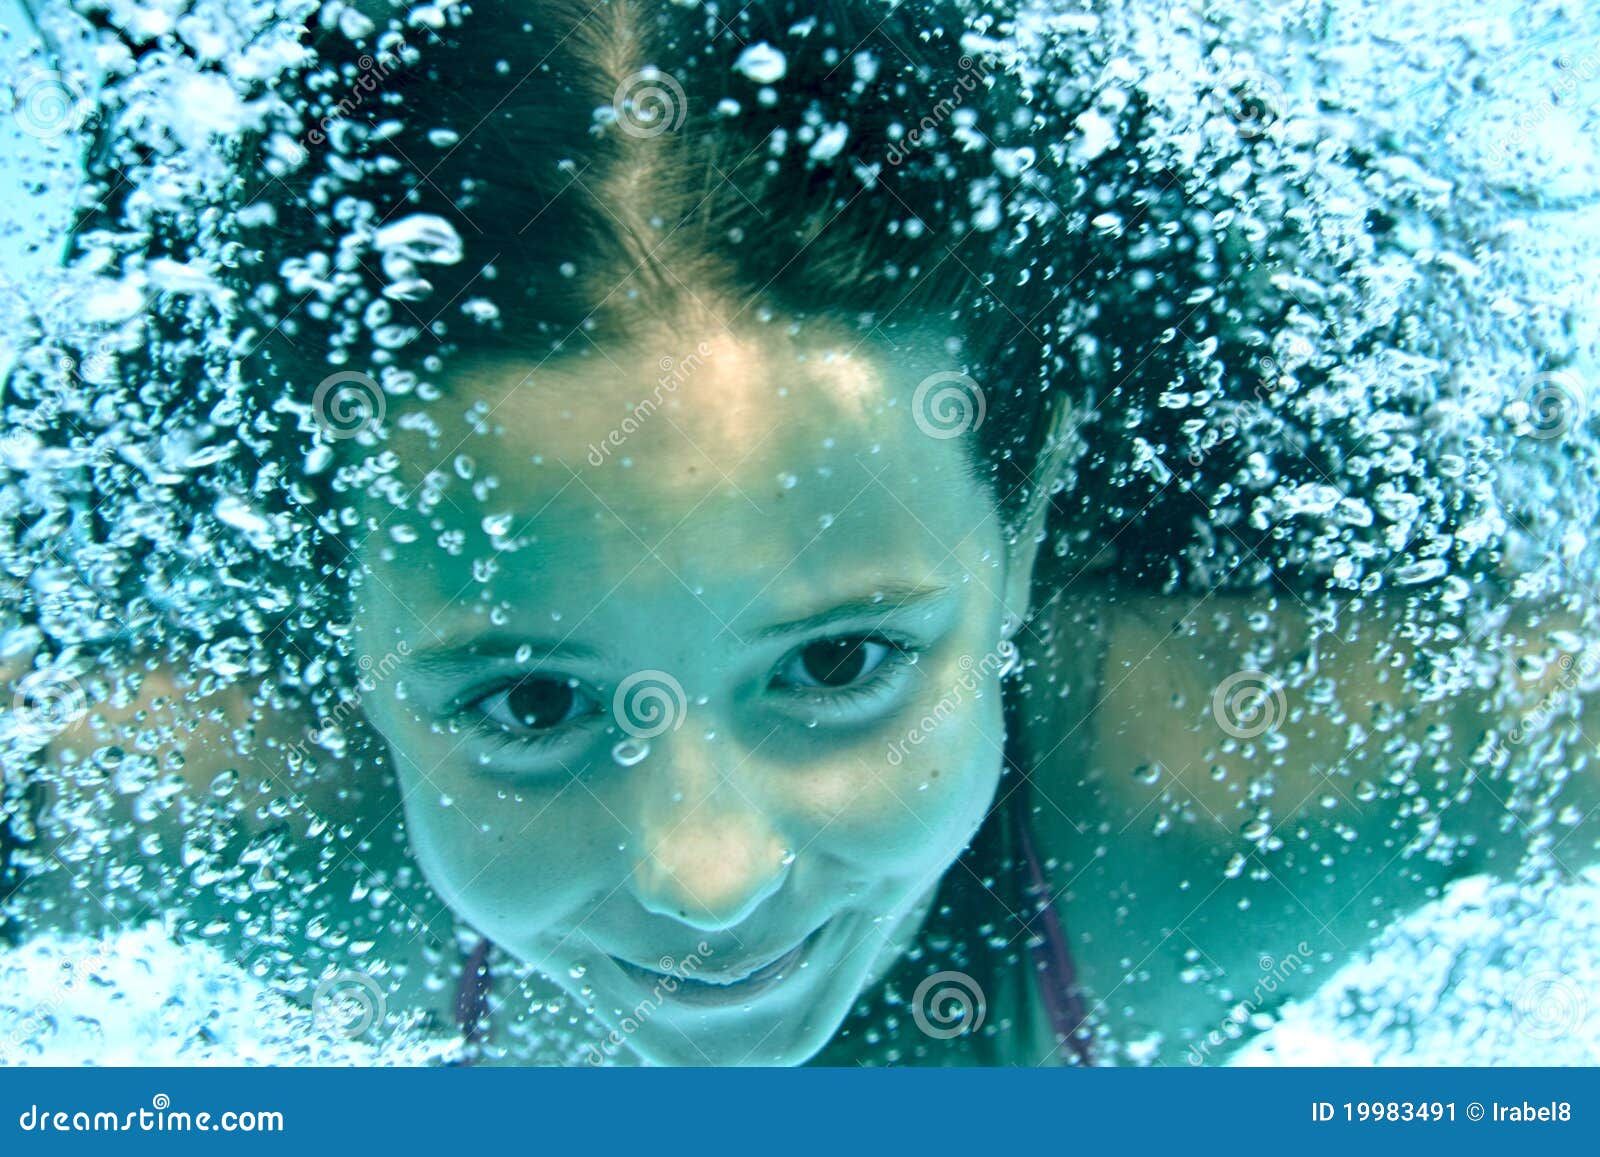 Underwater girl stock image. Image of action, closeup - 19983491